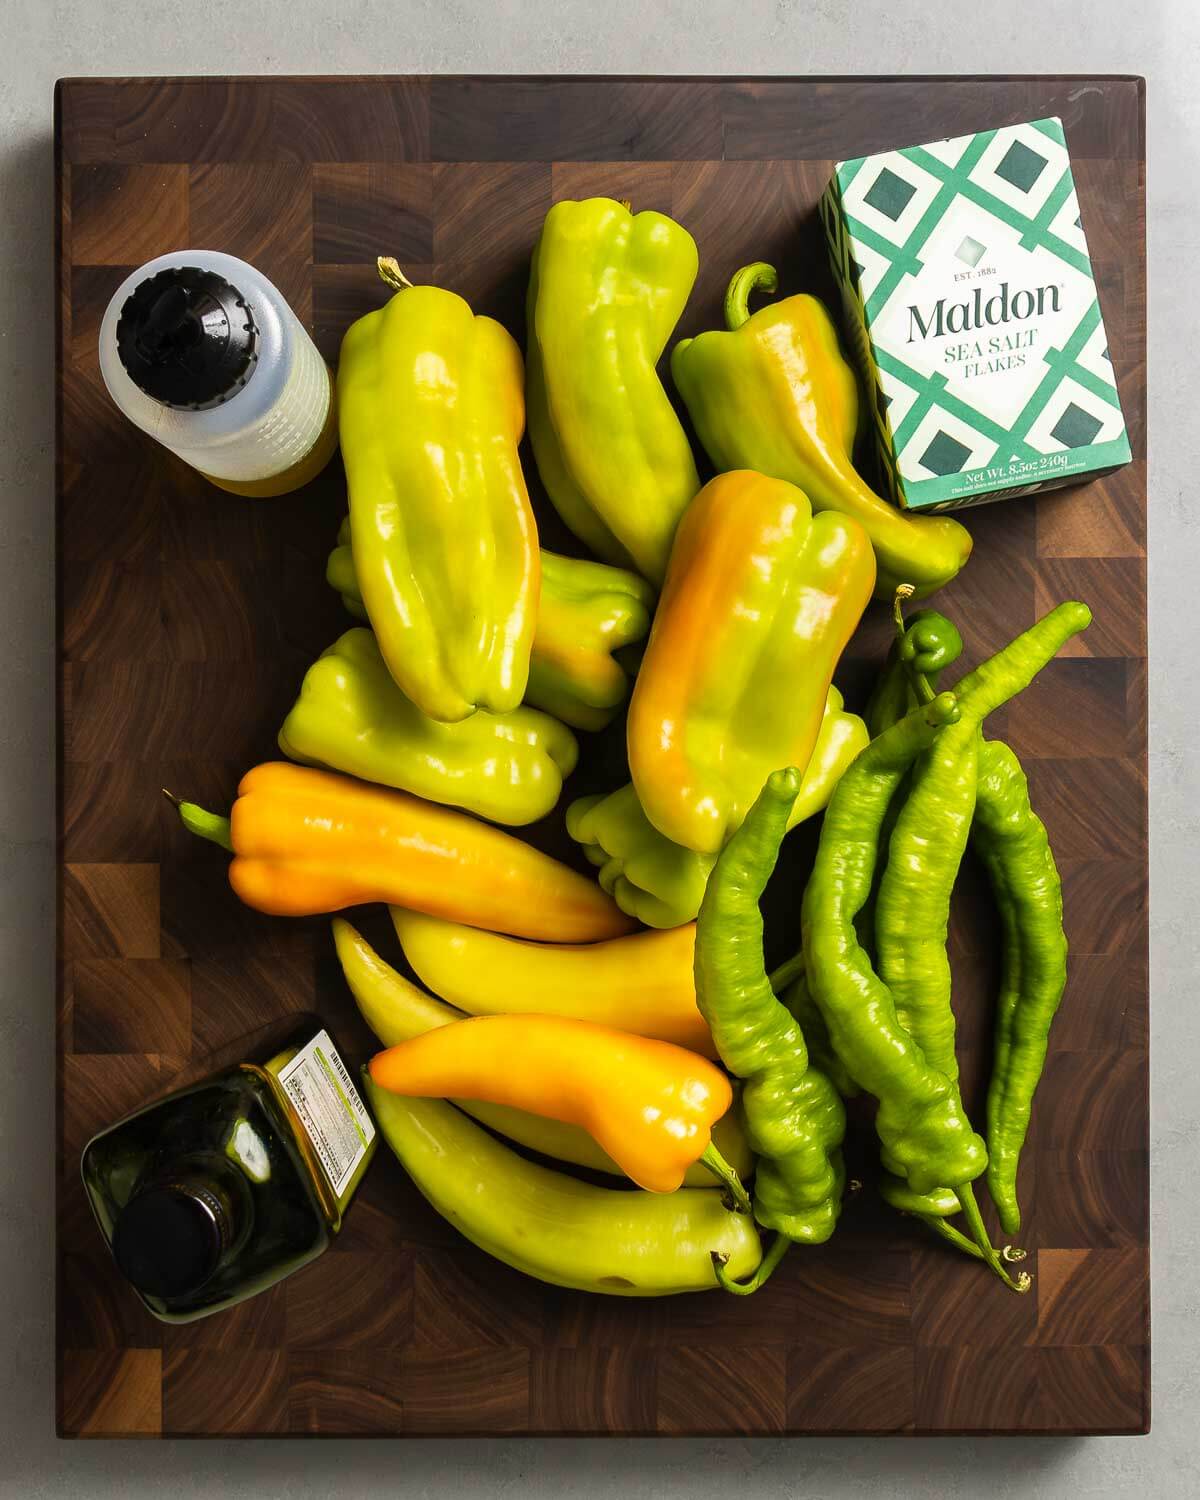 Ingredients shown: olive oil, Italian frying peppers or cubanelle, long hot peppers, sea salt, and avocado oil.